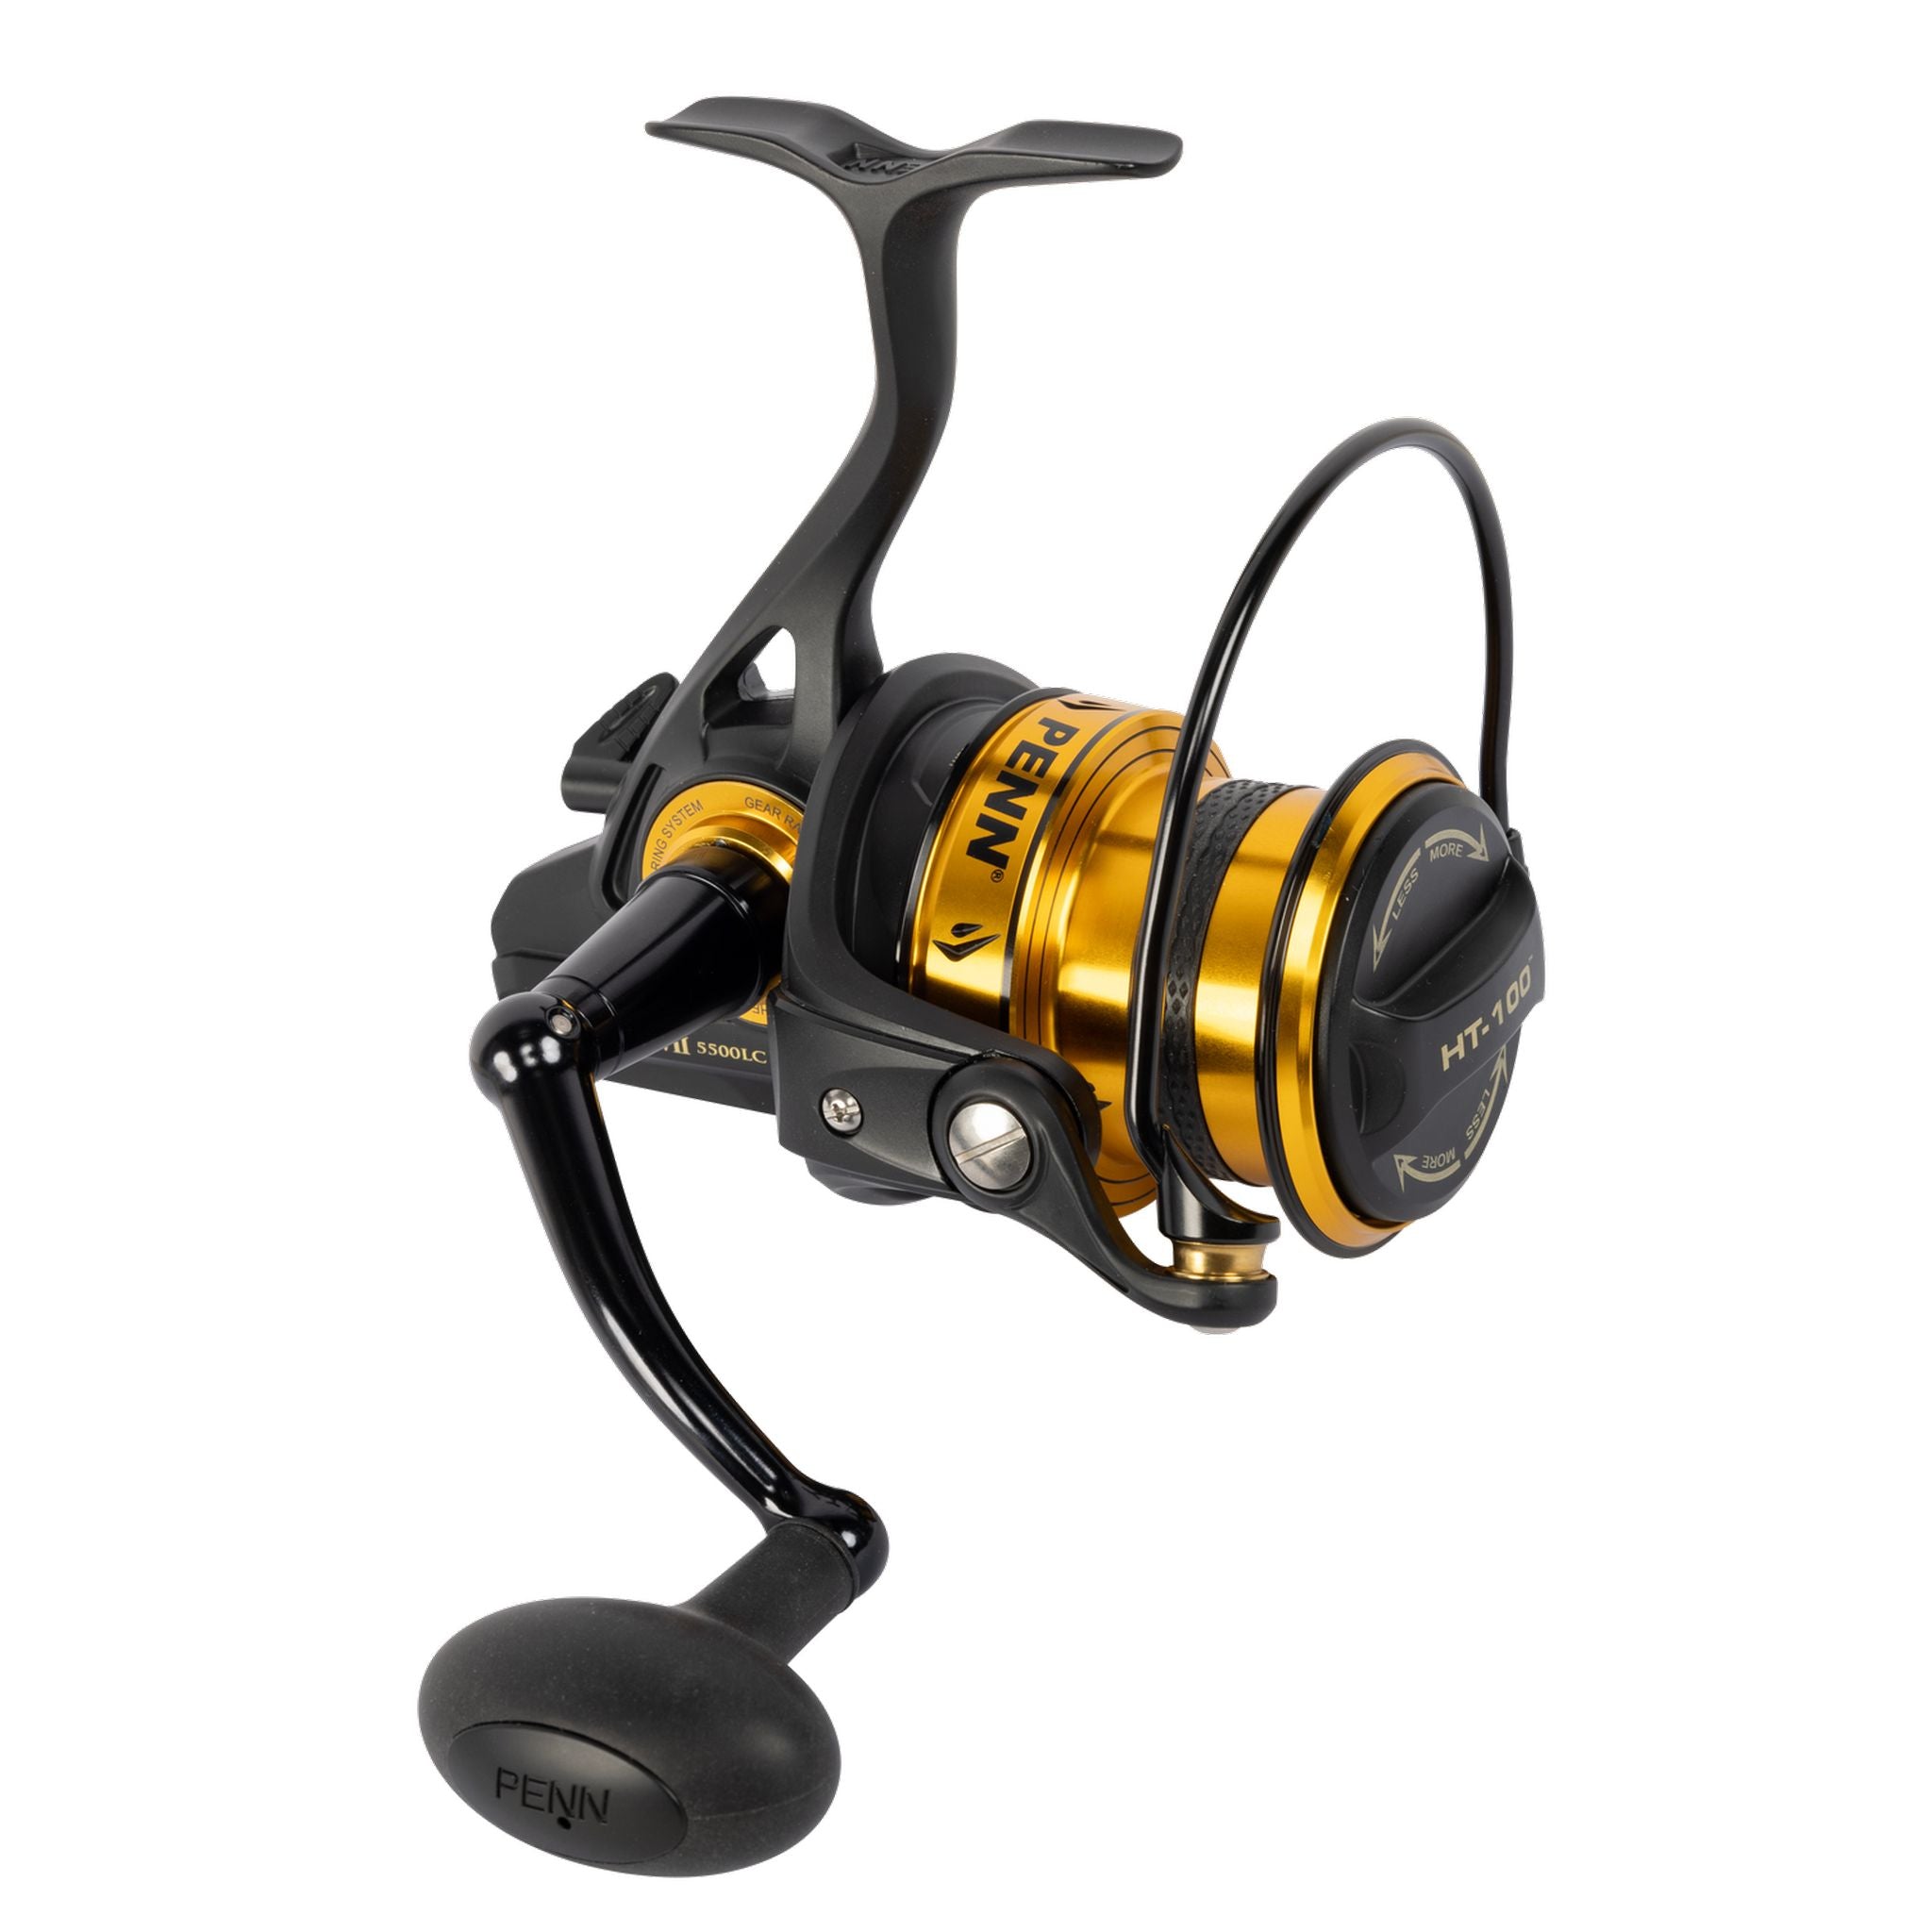 Penn Spinfisher vii 5500LC SP BX Spin Reel